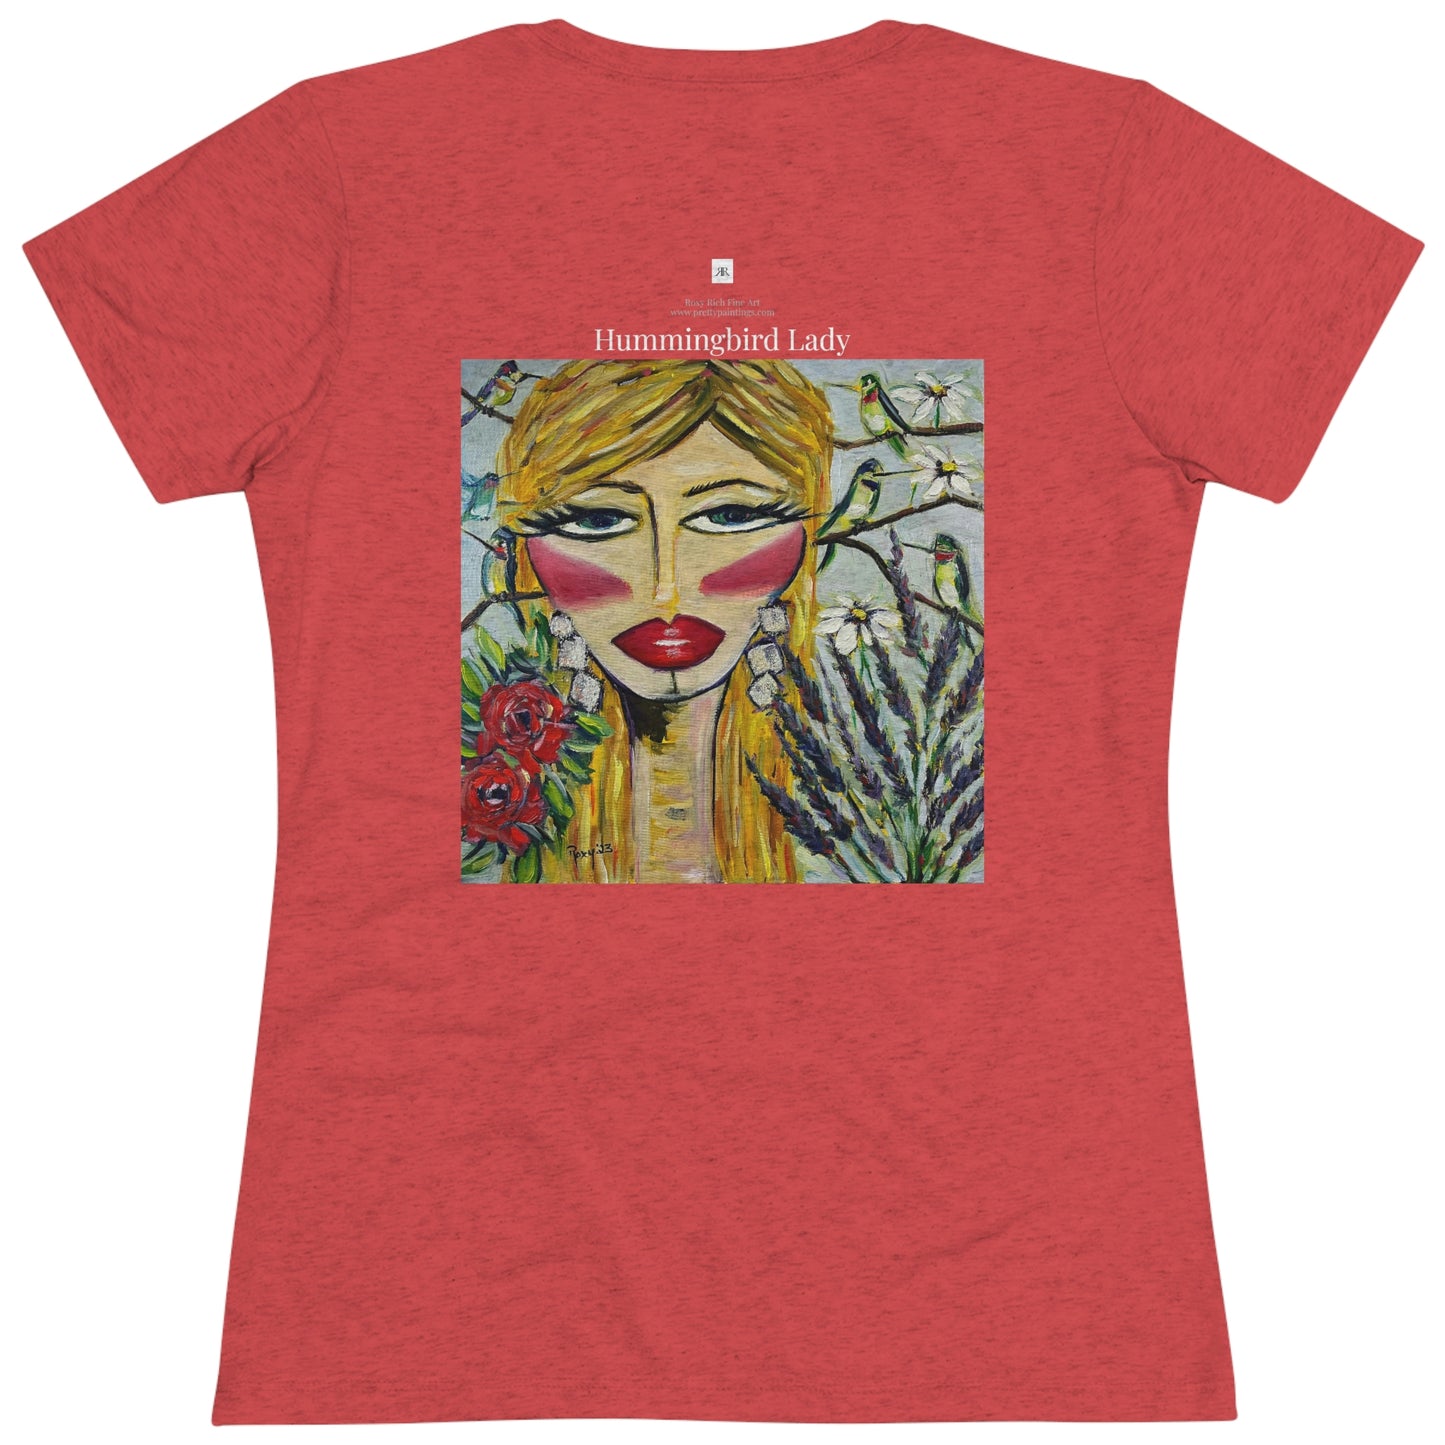 Hummingbird Lady (design on back) Women's fitted Triblend Tee  tee shirt